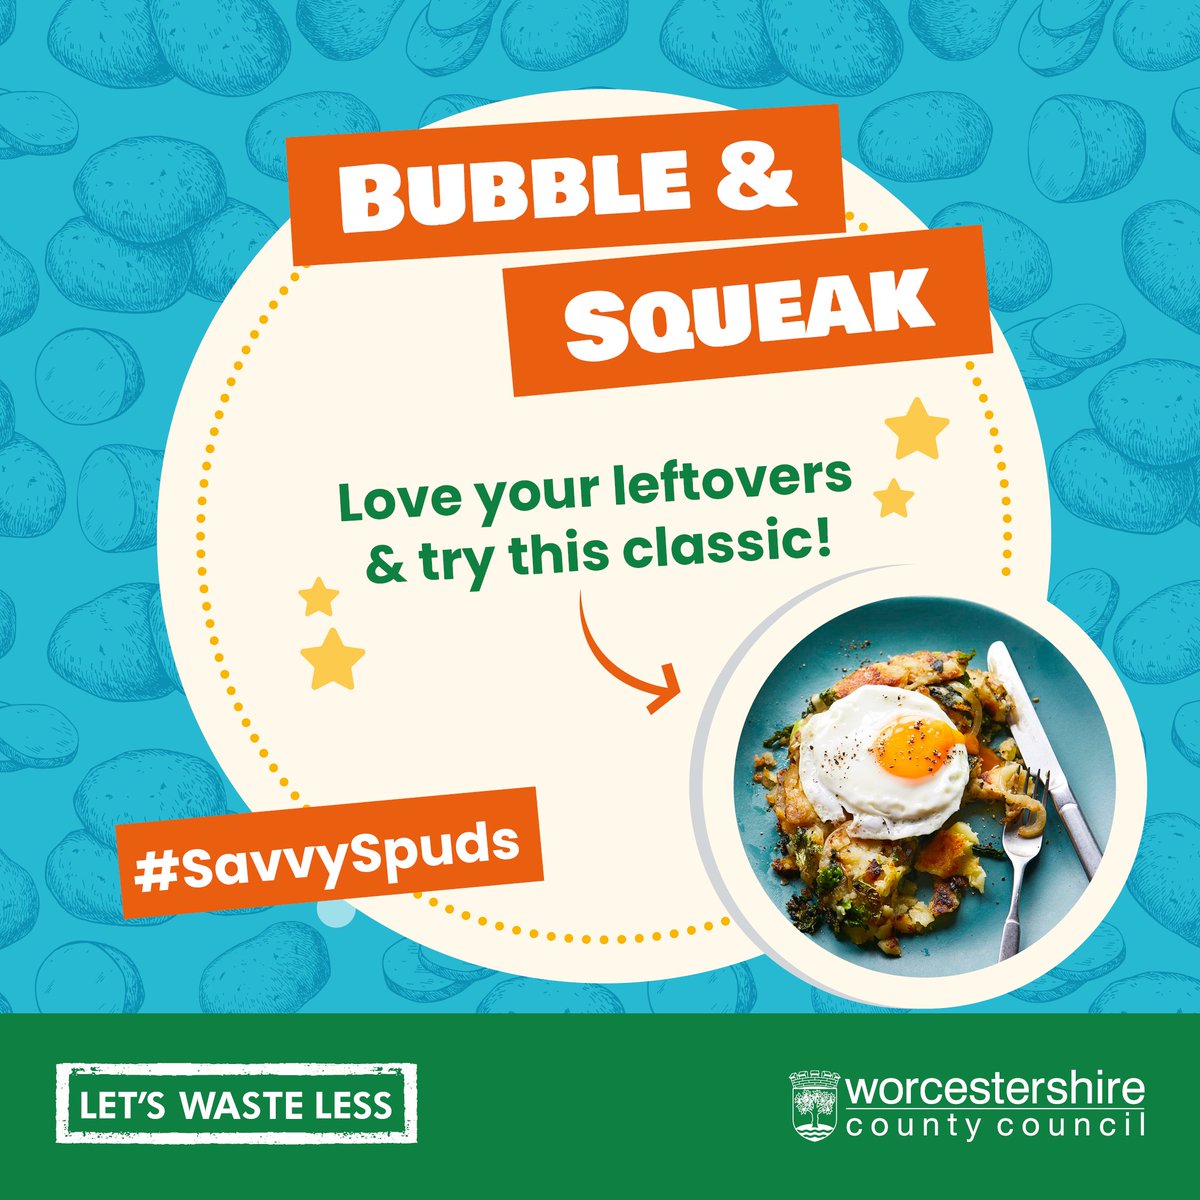 🥔♻️ Get creative with your spud leftovers and turn that mash into a delicious bubble & squeak for breakfast. Check out bit.ly/3N7Sa6o for more savvy spud ideas. 🌟 #SavvySpuds #FoodSavvyWorcestershire #letswasteless #NoFoodWaste #LeftoversRock